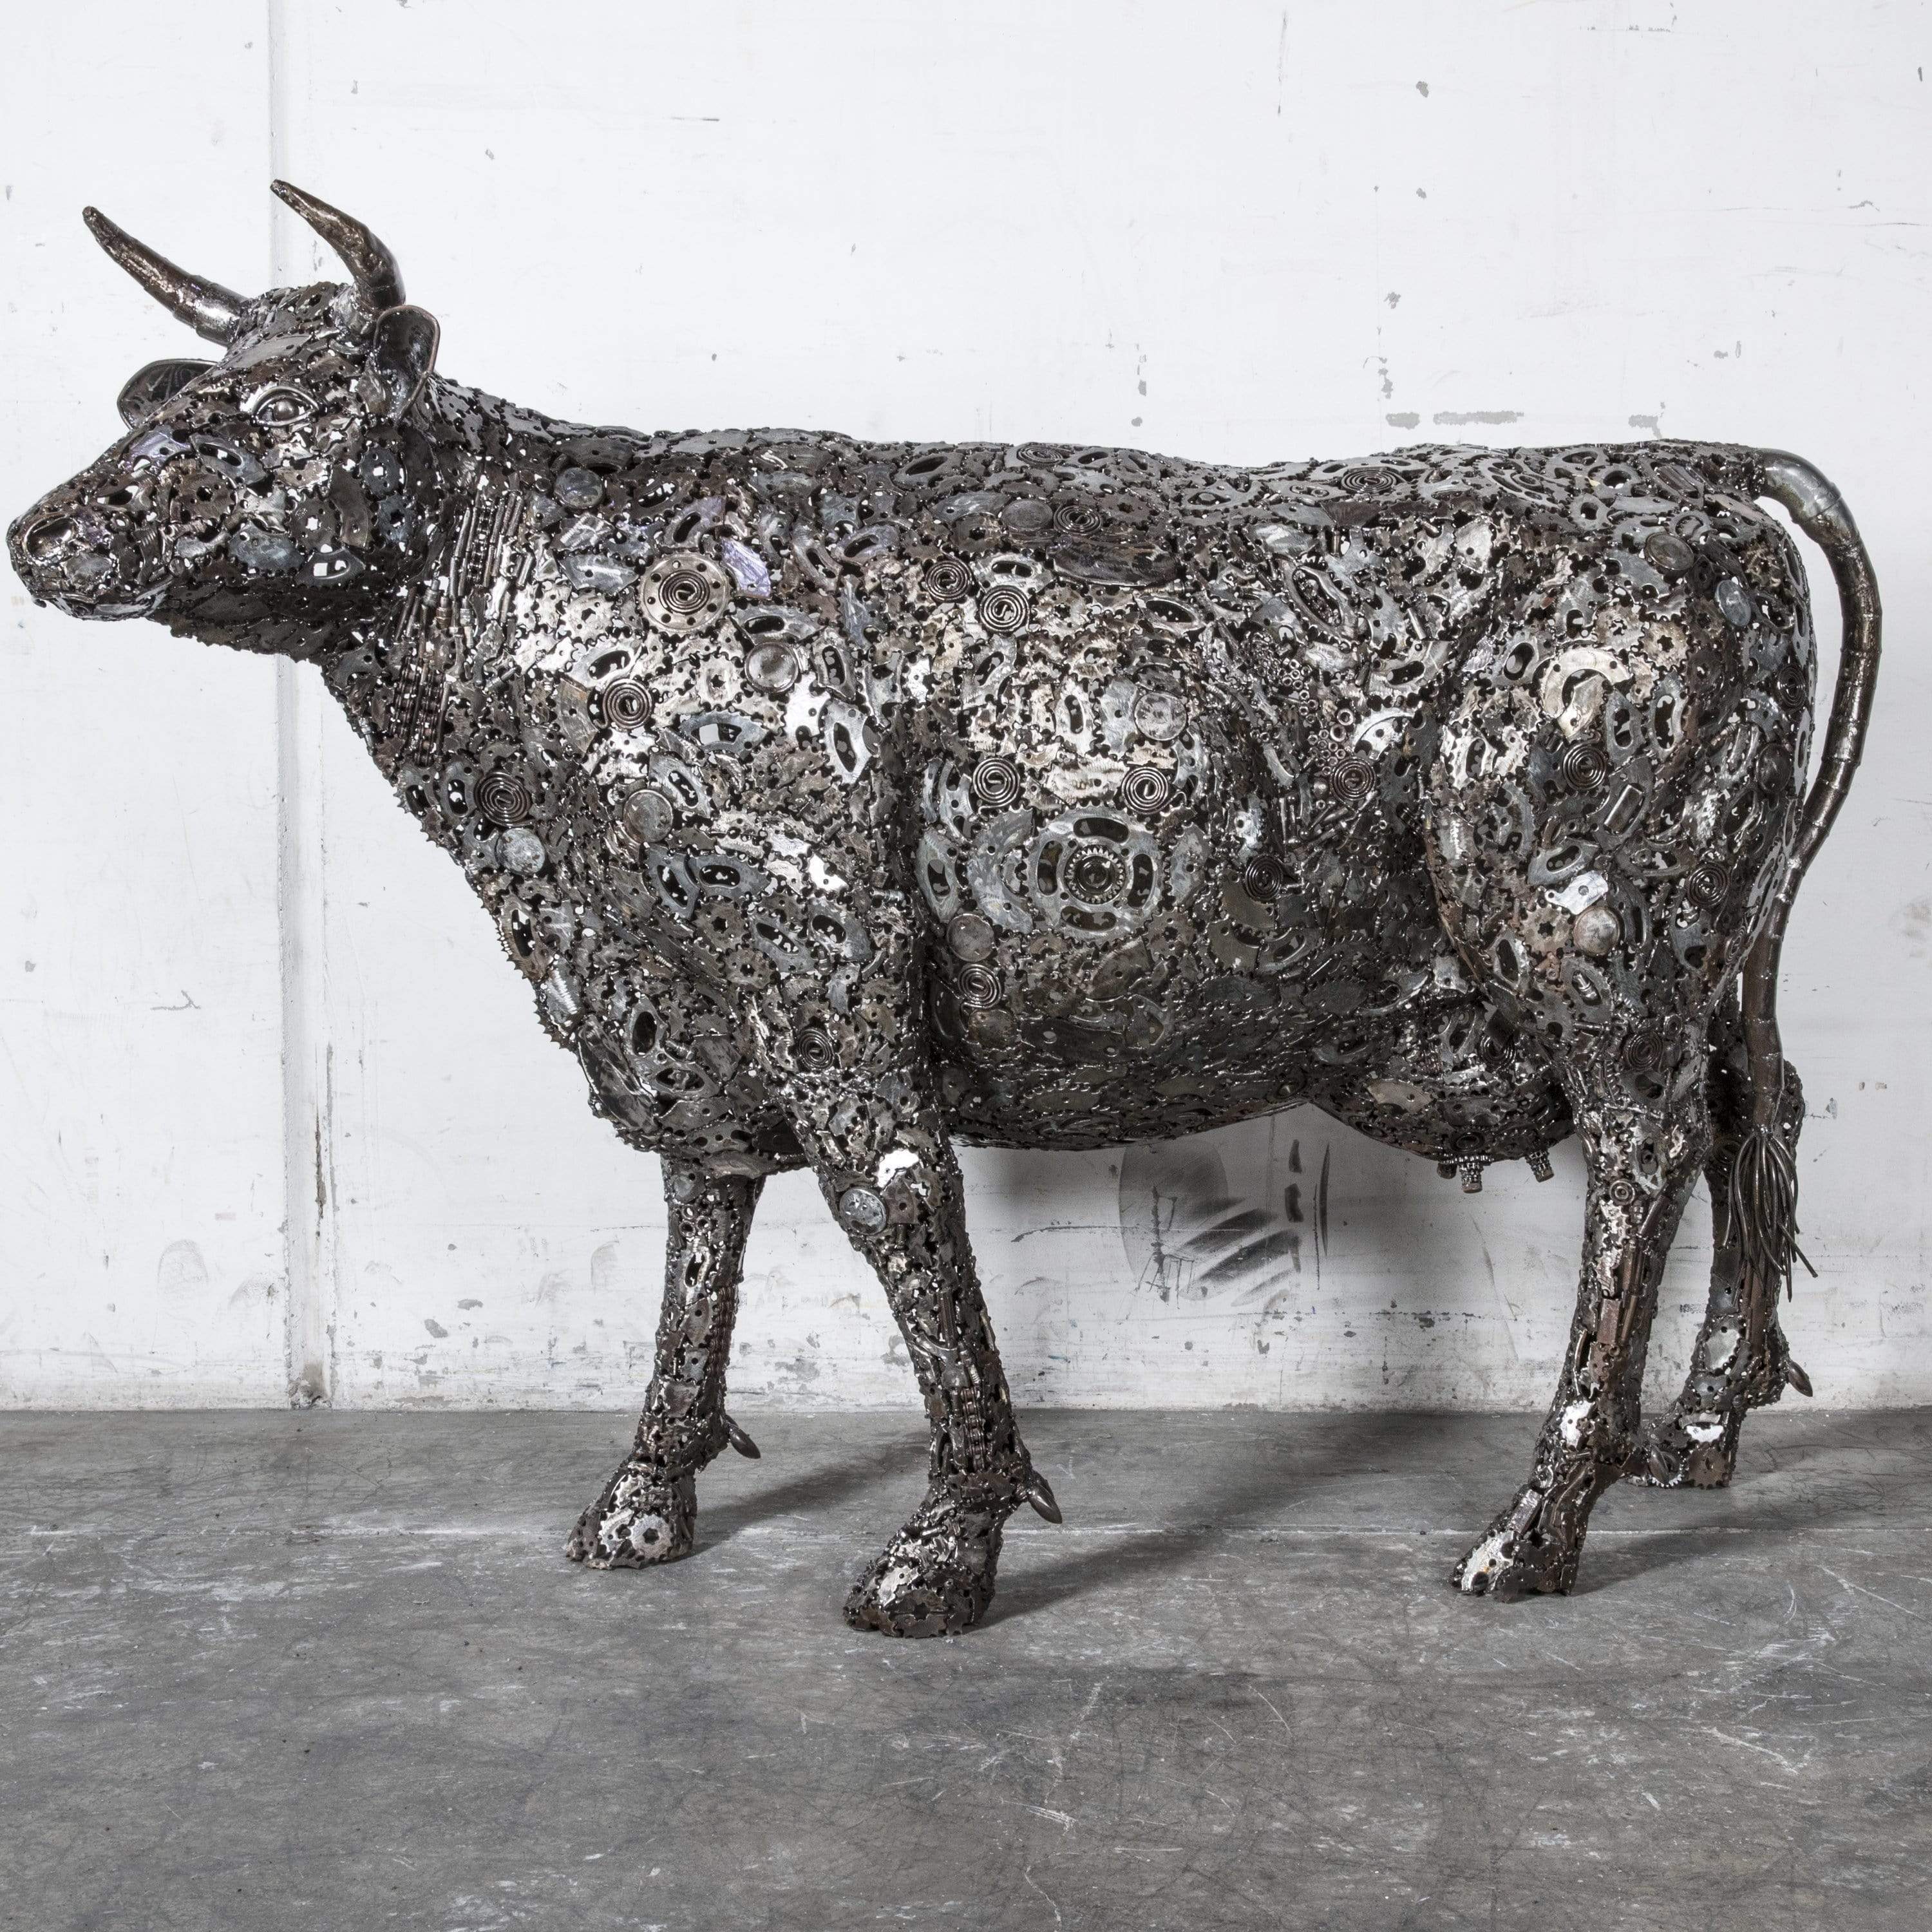 Kalifano Recycled Metal Art 61” Cow Recycled Metal Art Sculpture RMS-COW150-P01